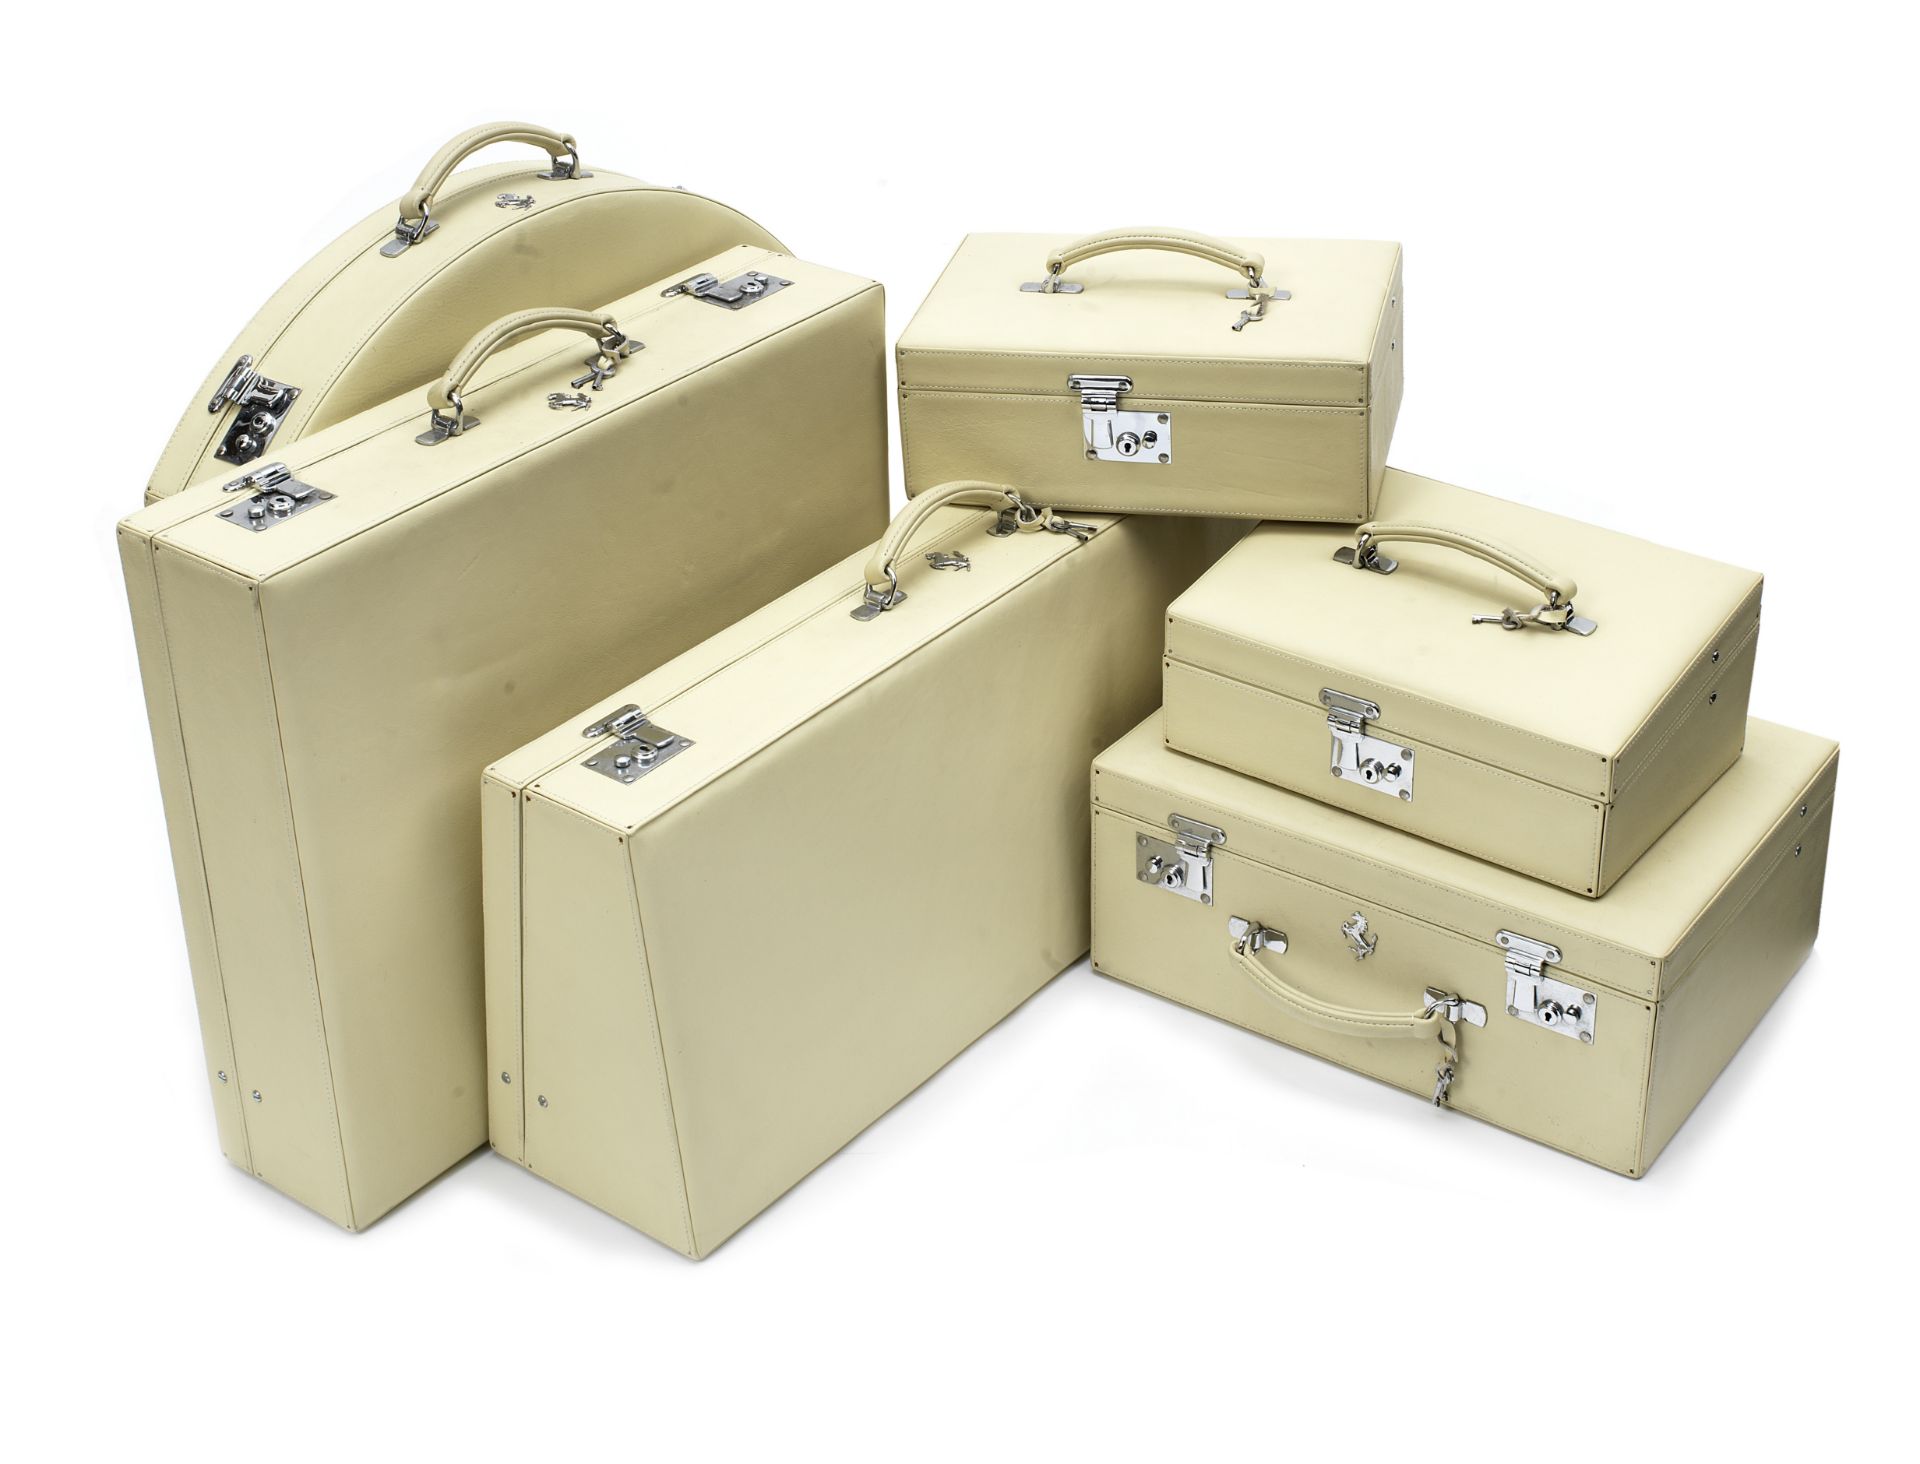 A six-piece set of bespoke luggage for Ferrari Testarossa, by Trunks of Haslemere, ((6))